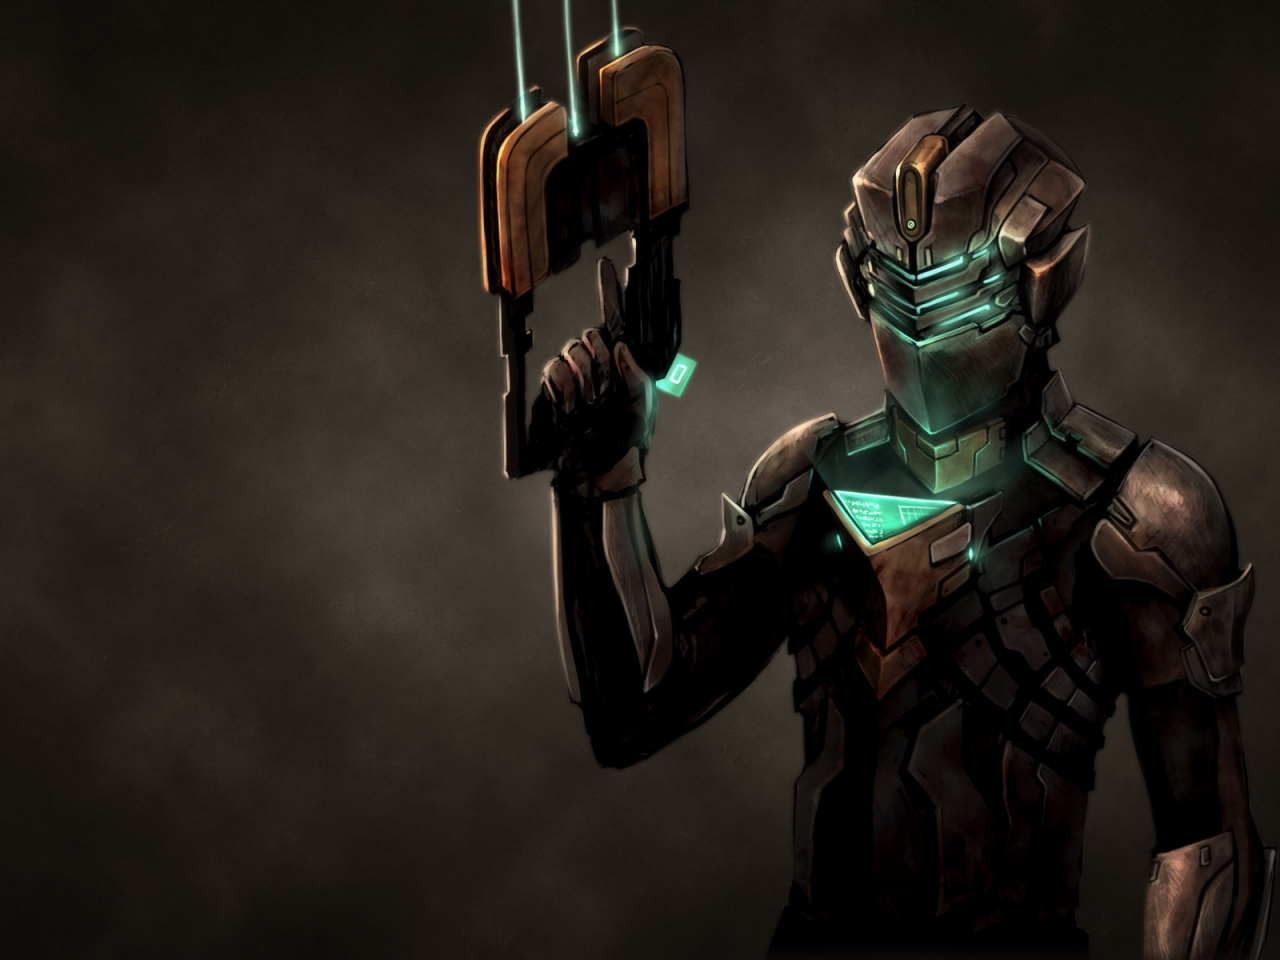 Dead Space Suit for 1280 x 960 resolution